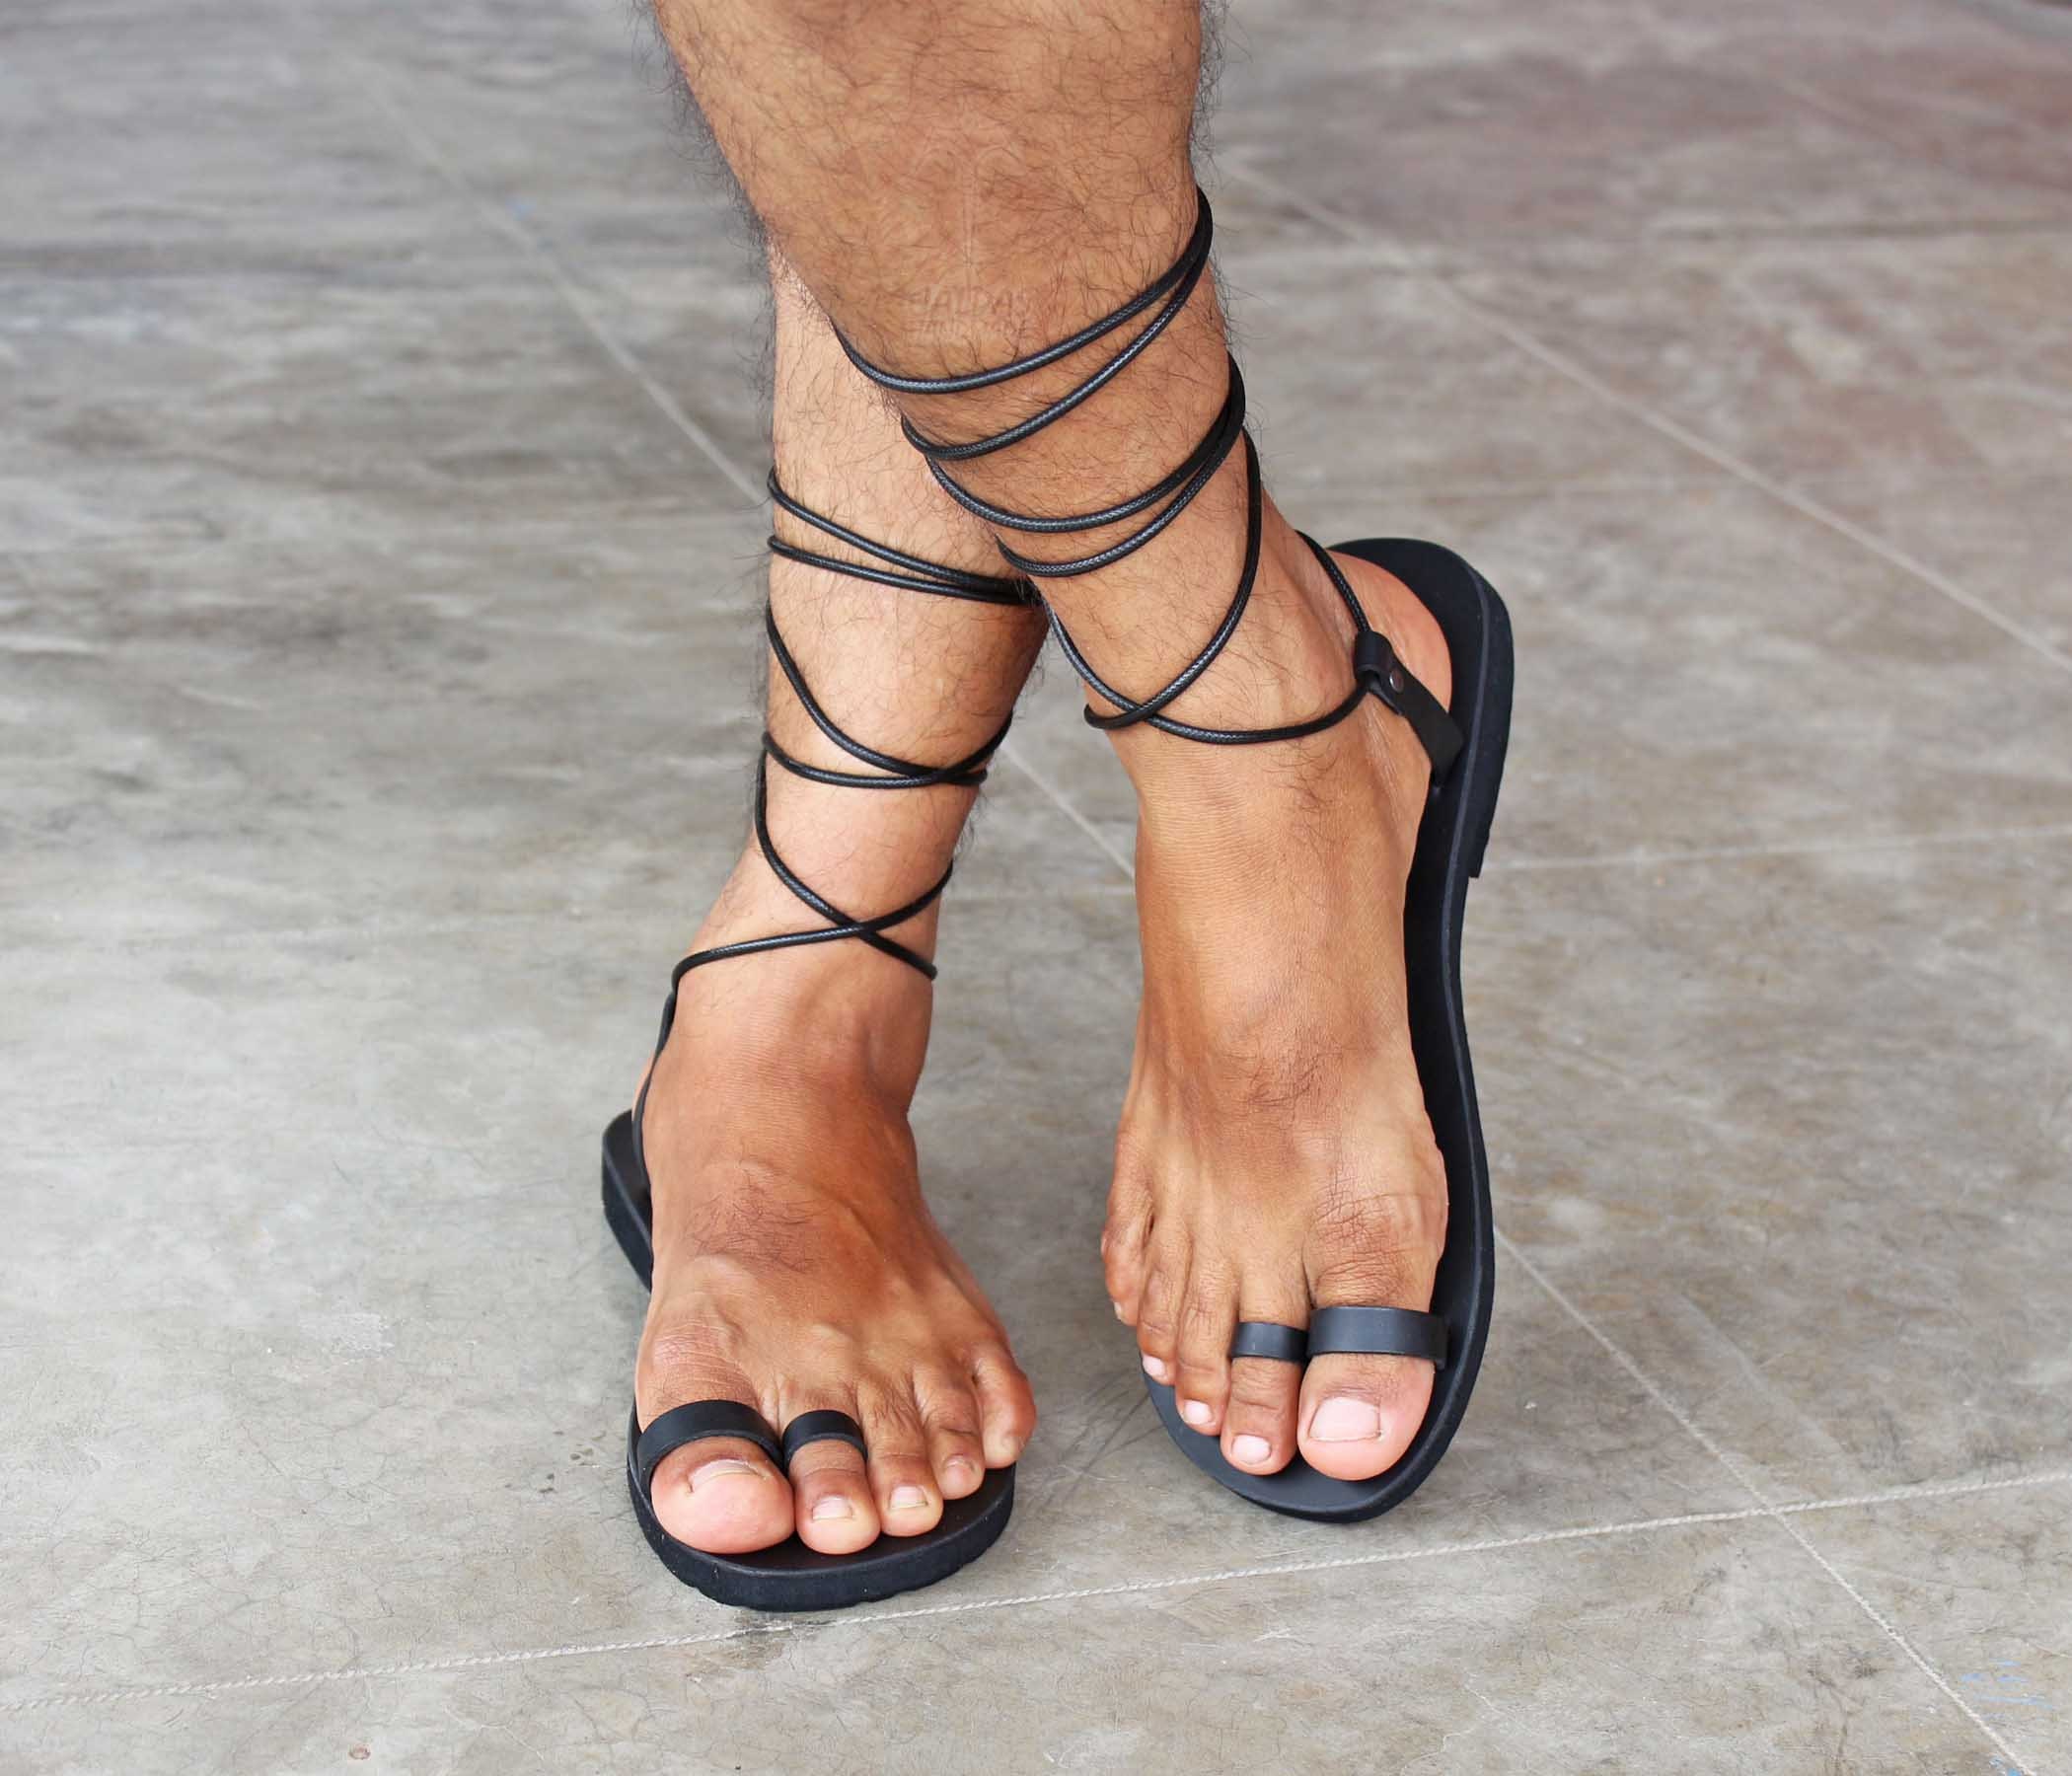 DREAM EXPEDITED SHIPPING Barefoot Sandals Leather Sandals Black Gladiator Sandals Toe Ring Sandals Ankle Strap Sandals 